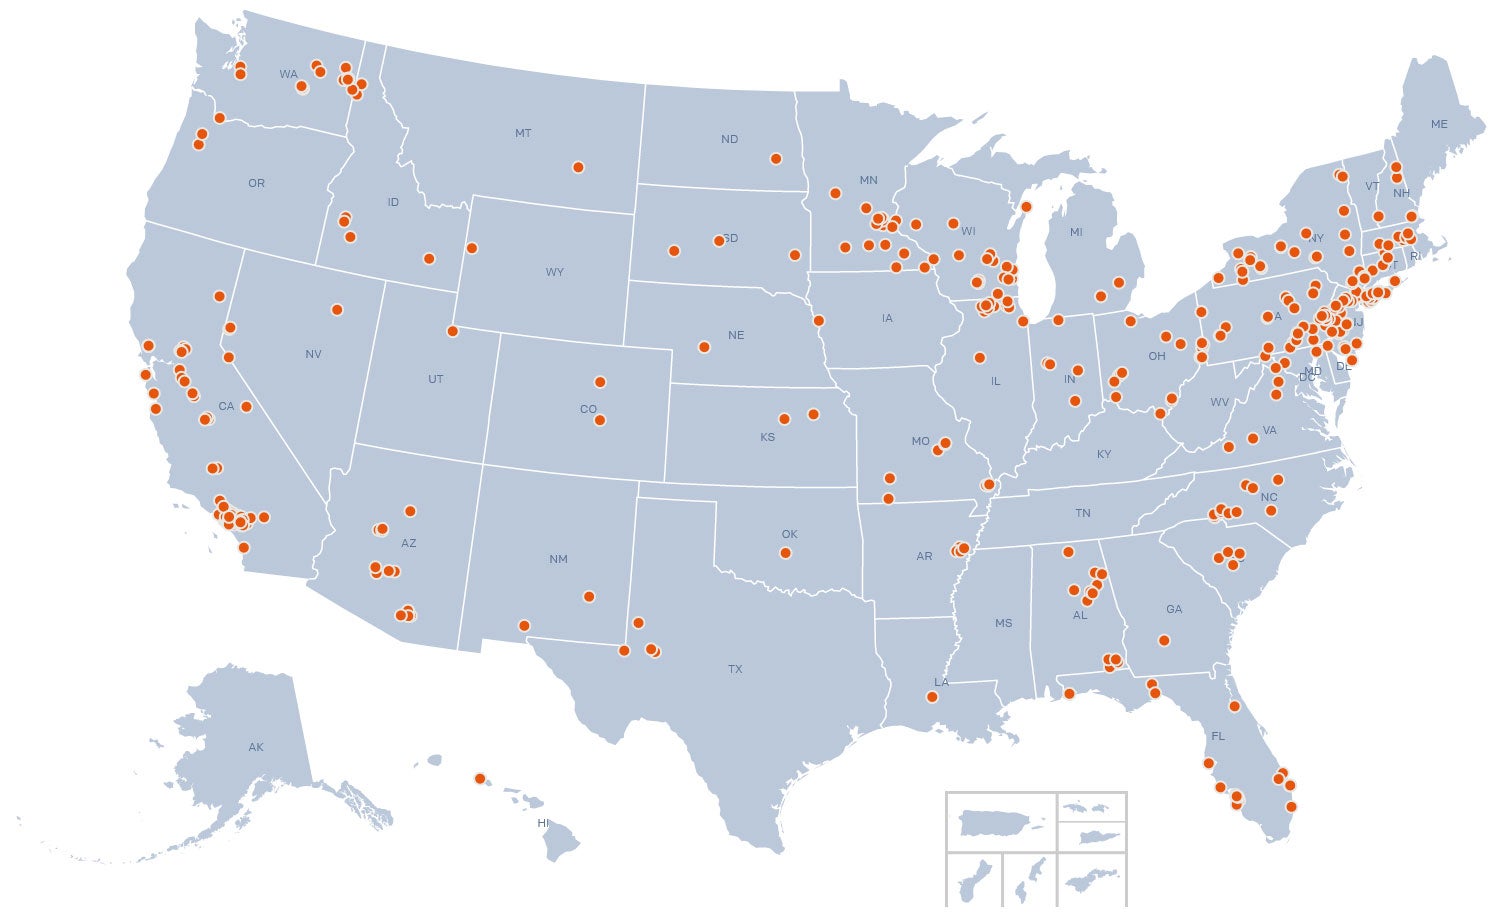 Map of the United States showing the hundreds of locations where trichloroethylene contamination has been found in drinking water supplies for public water systems.